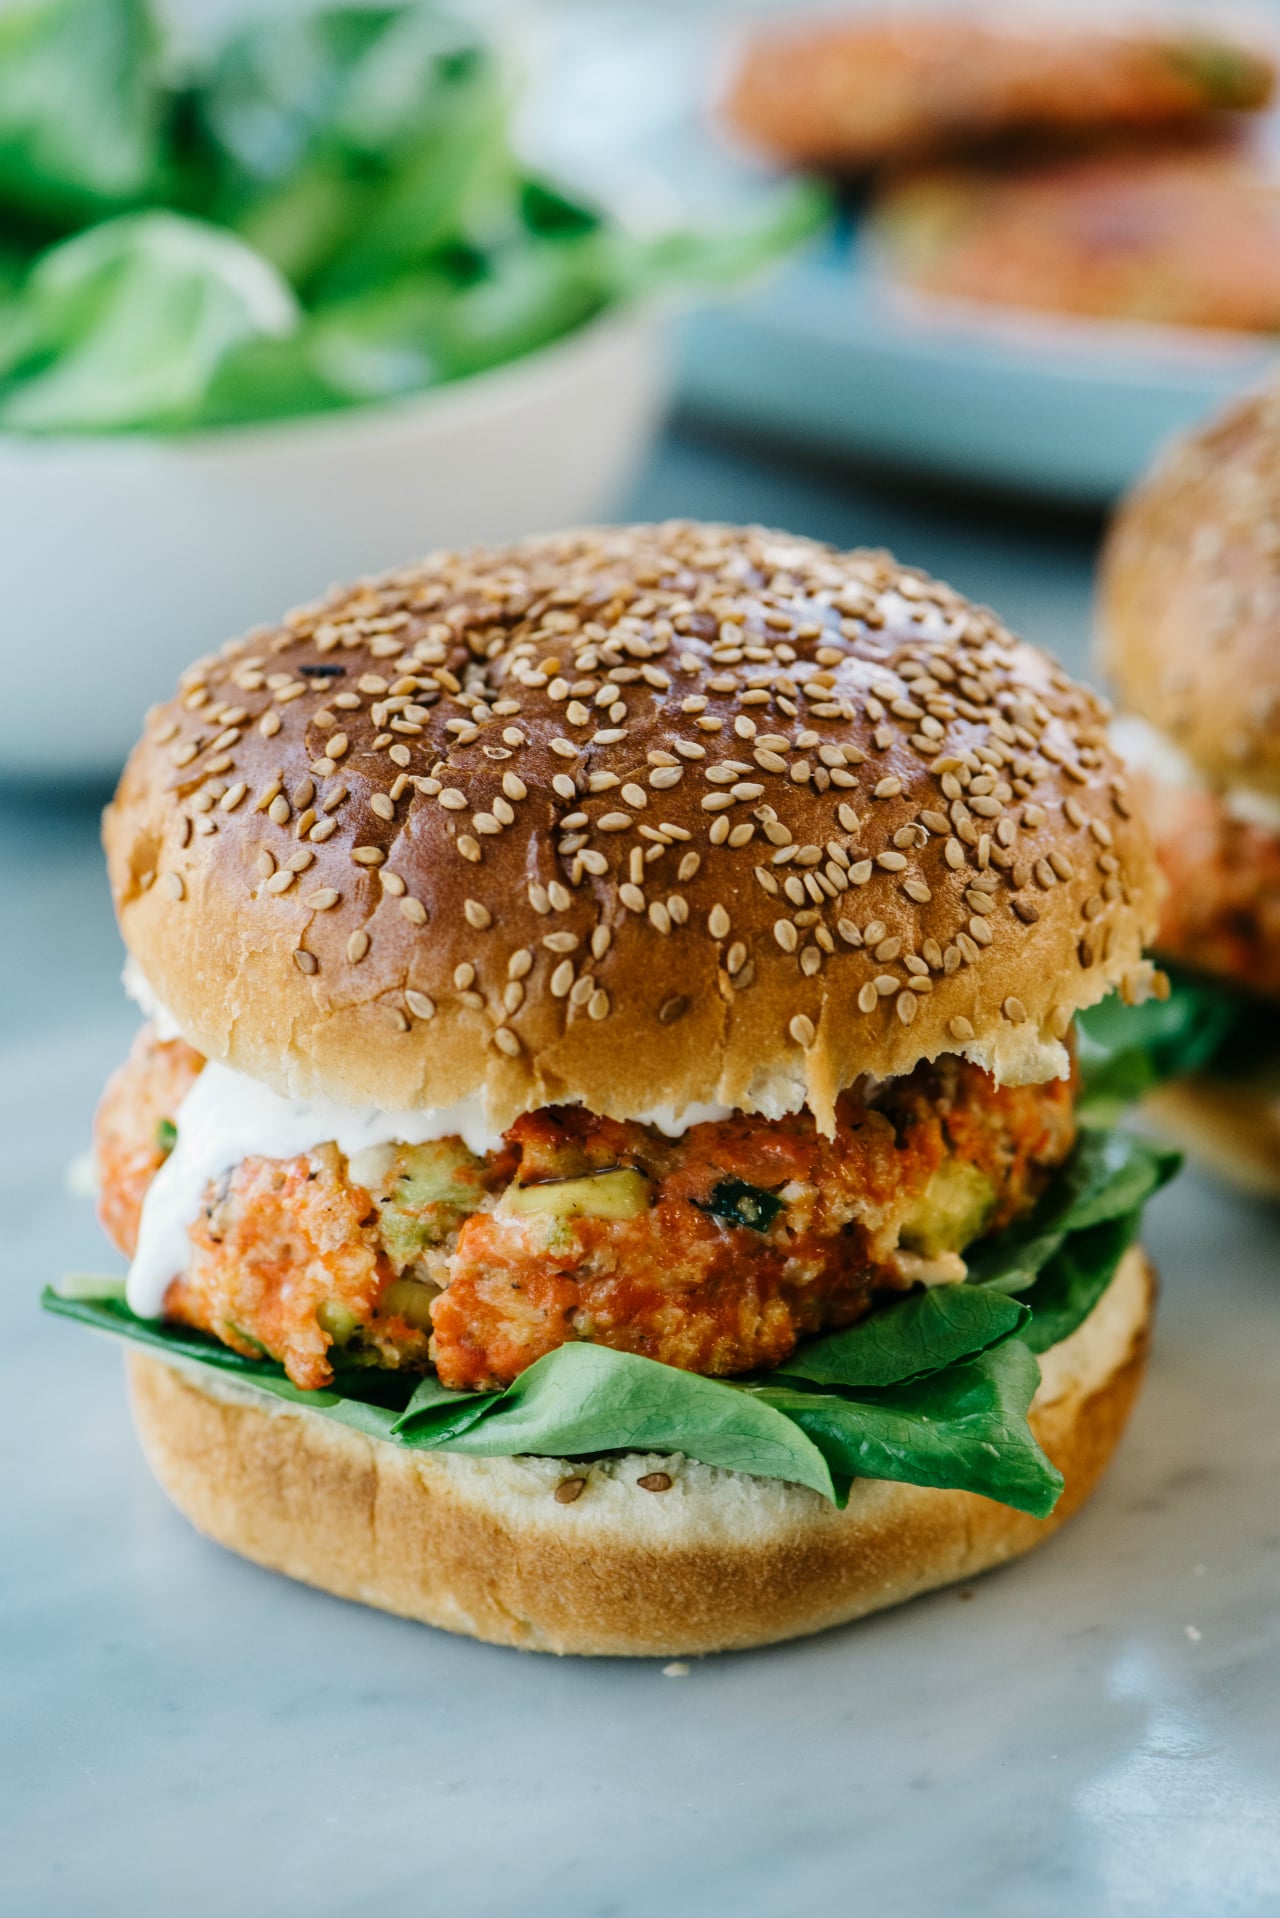 Salmon burger on a sesame seed bun with ranch and spinach